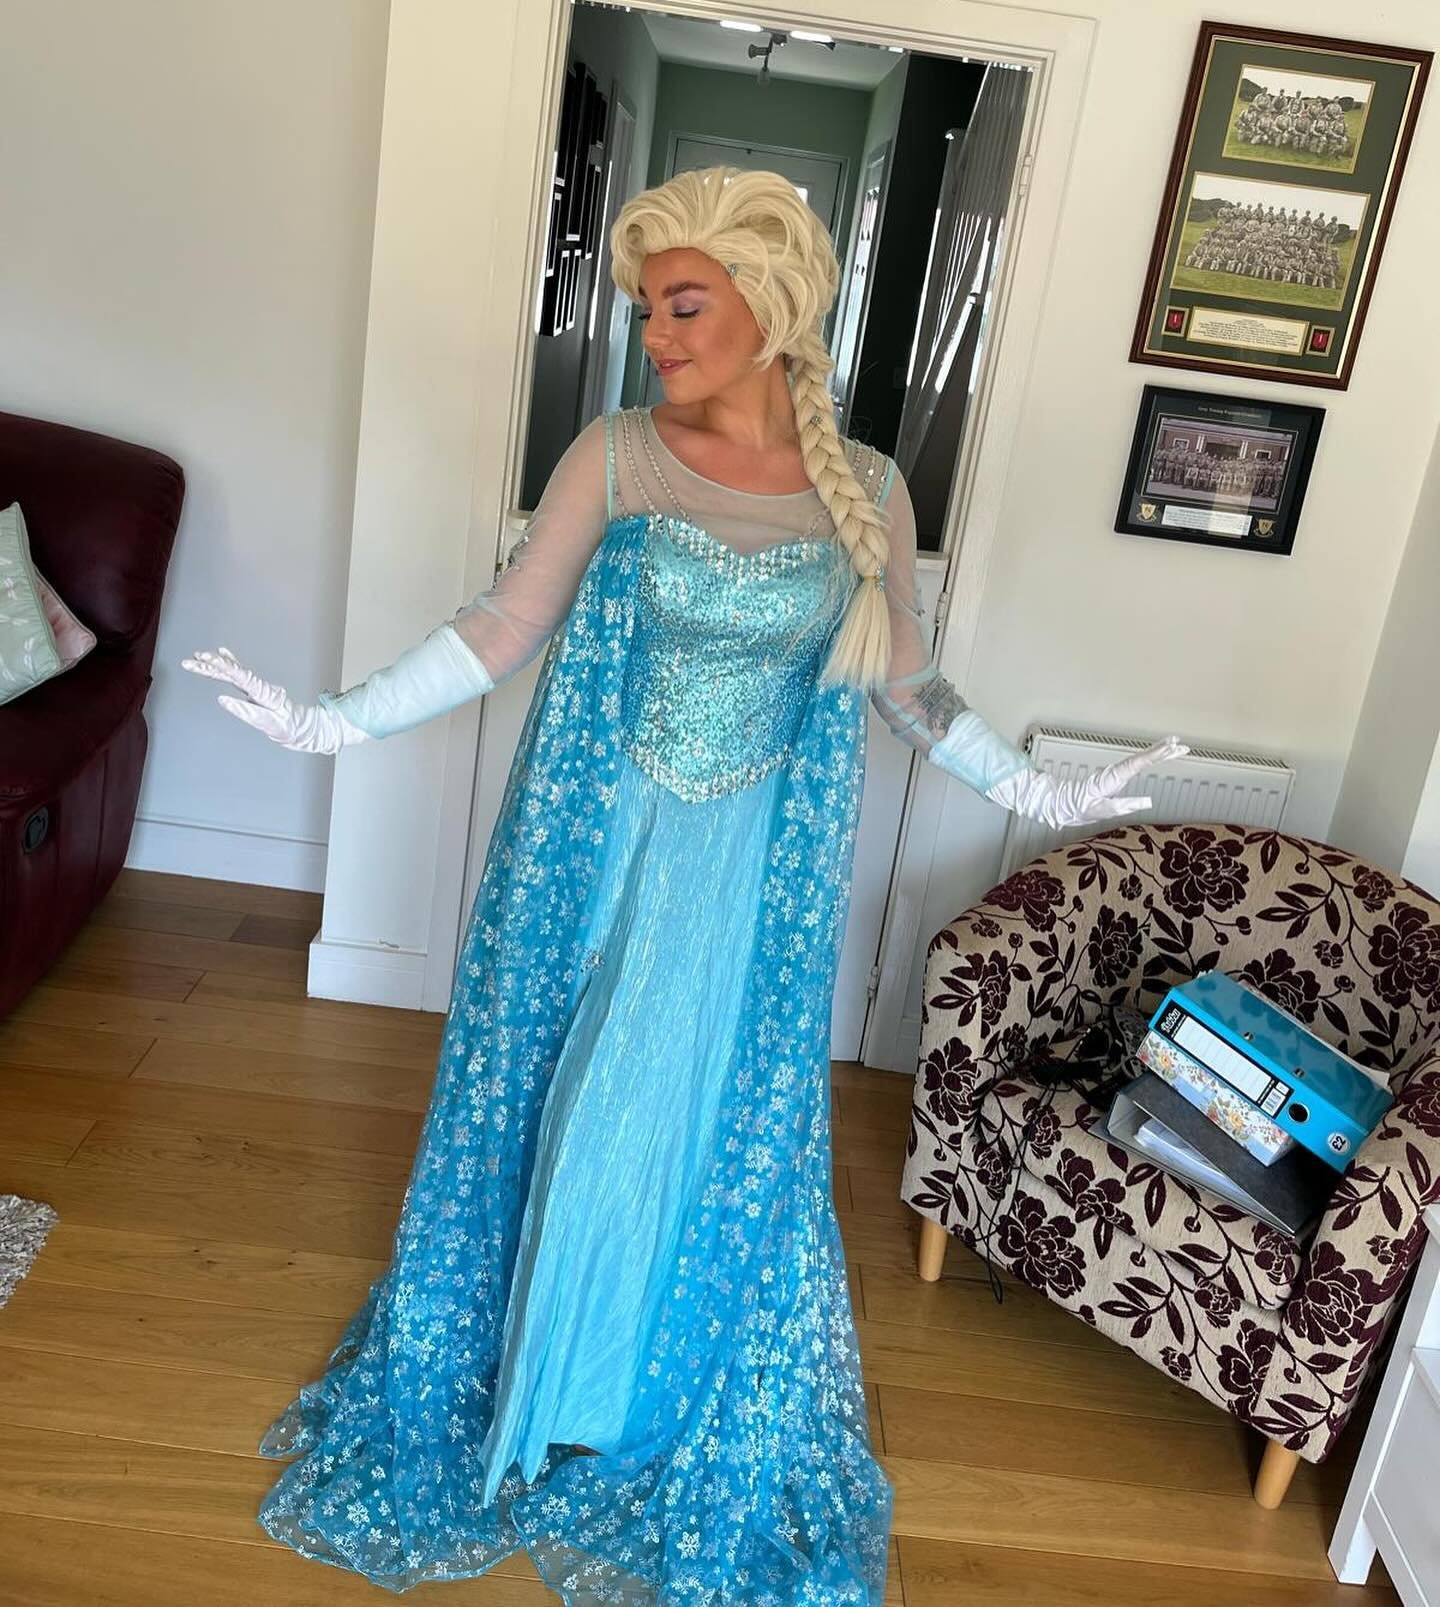 Our Snow Queen was out today making wishes come true! ❄️✨